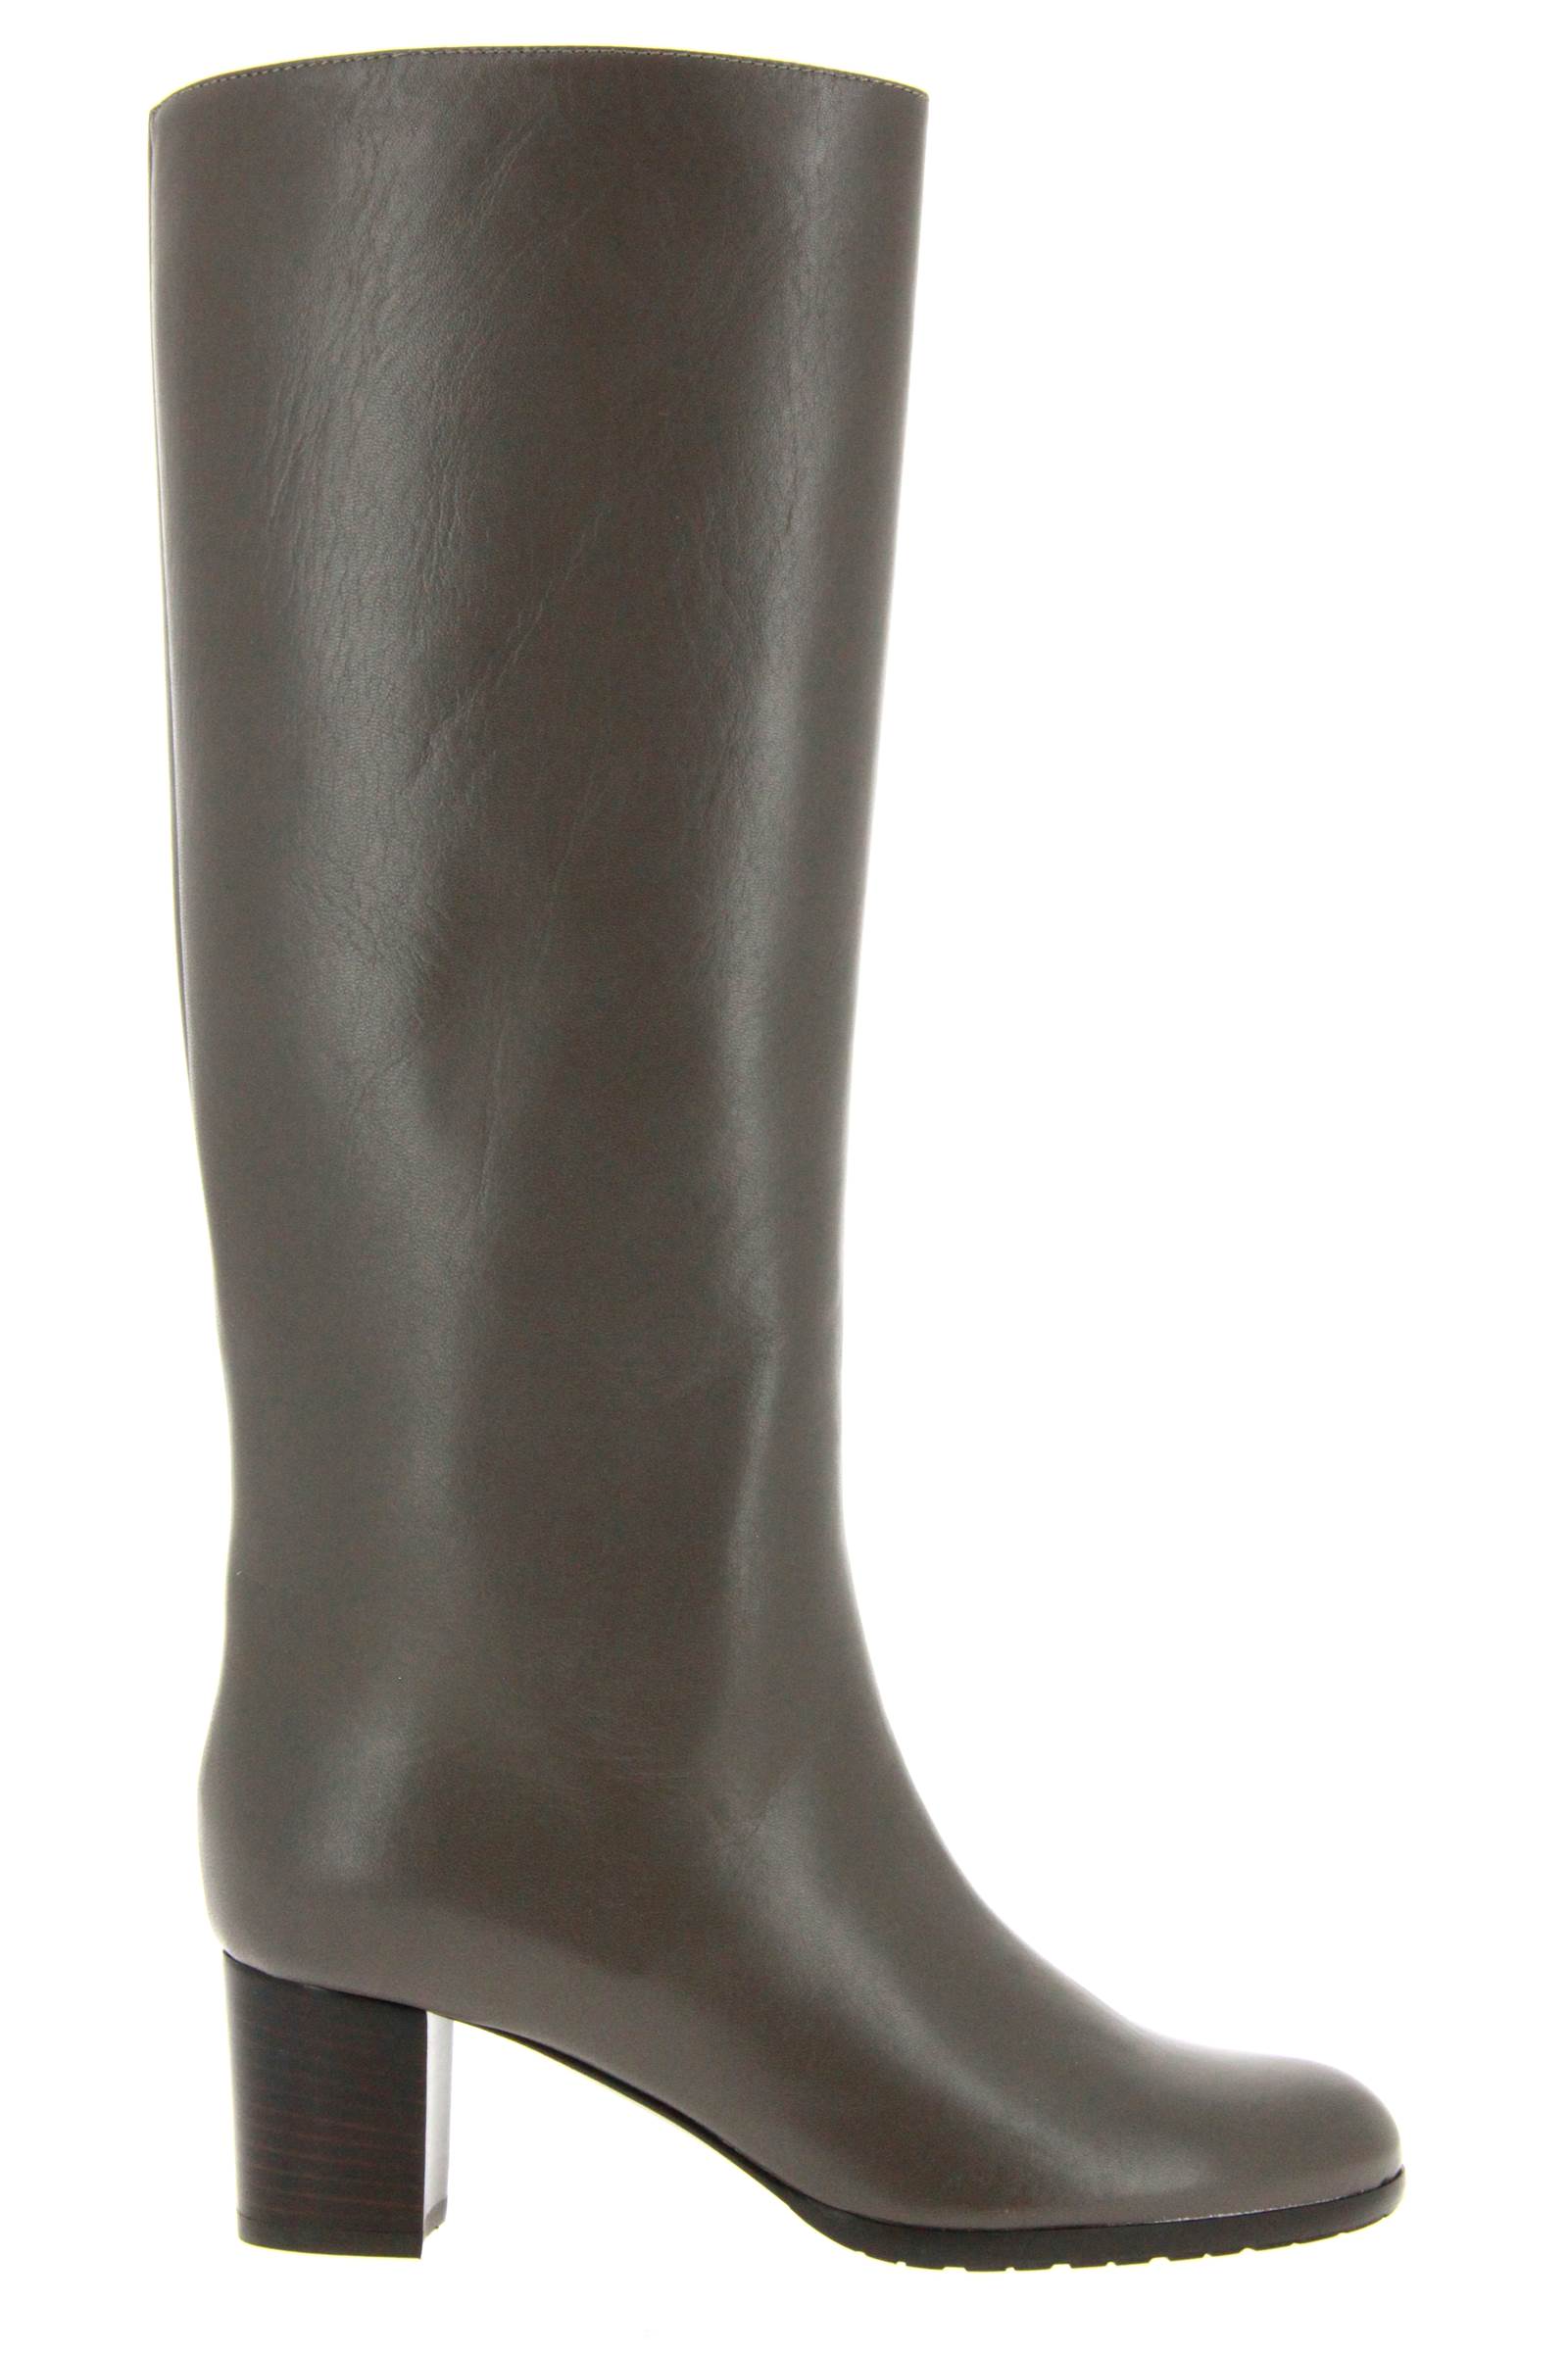 Dyva Stiefel NAPPA PALUDE TAUPE (41)